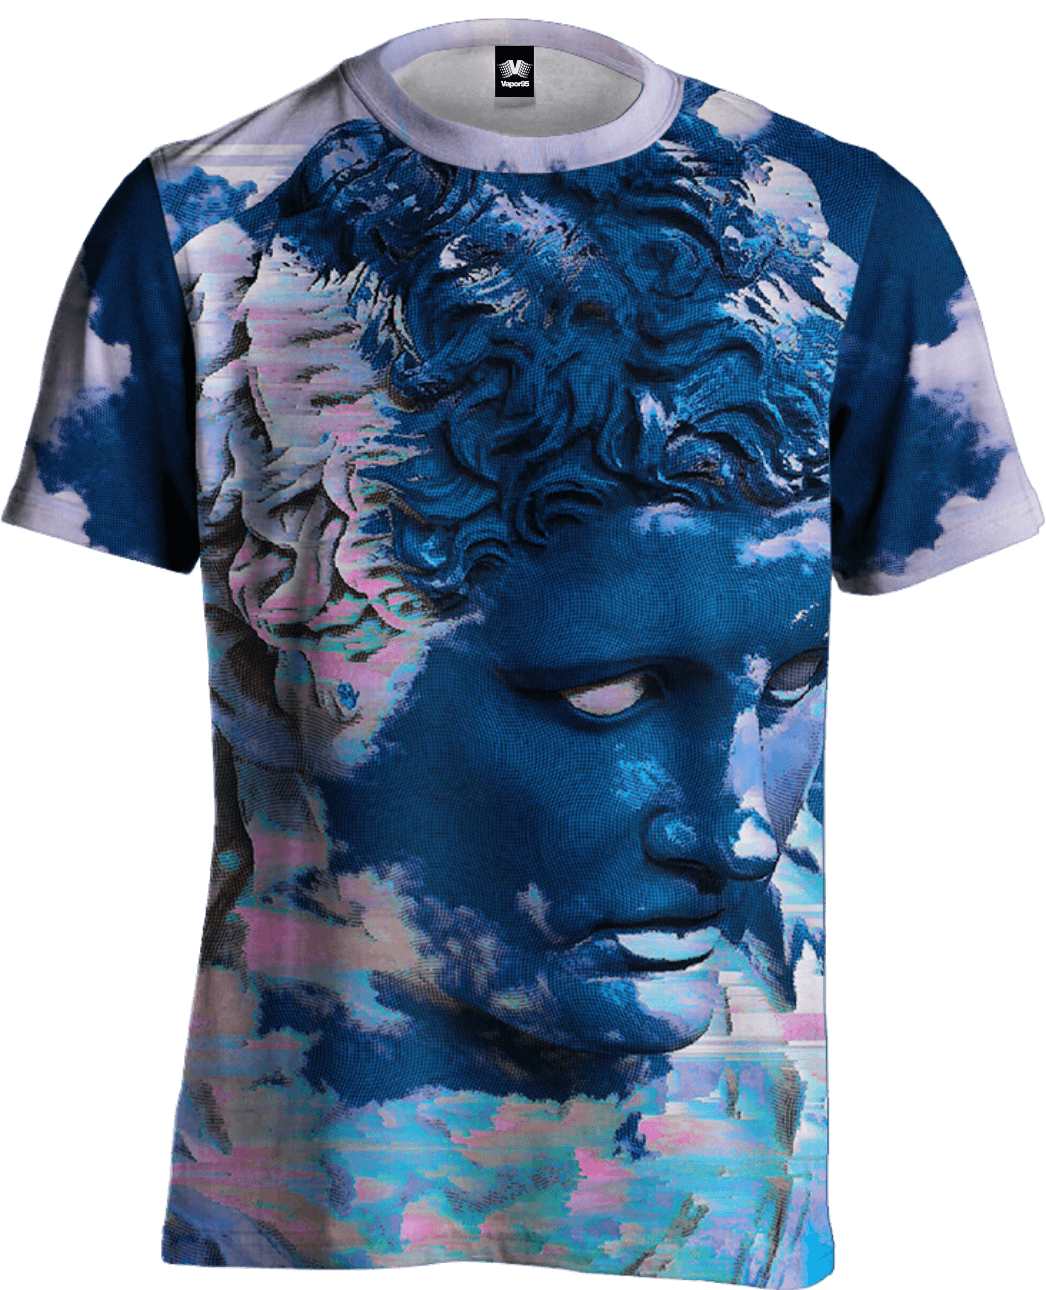 Distorted Visage Tee All Over Print Tee T6